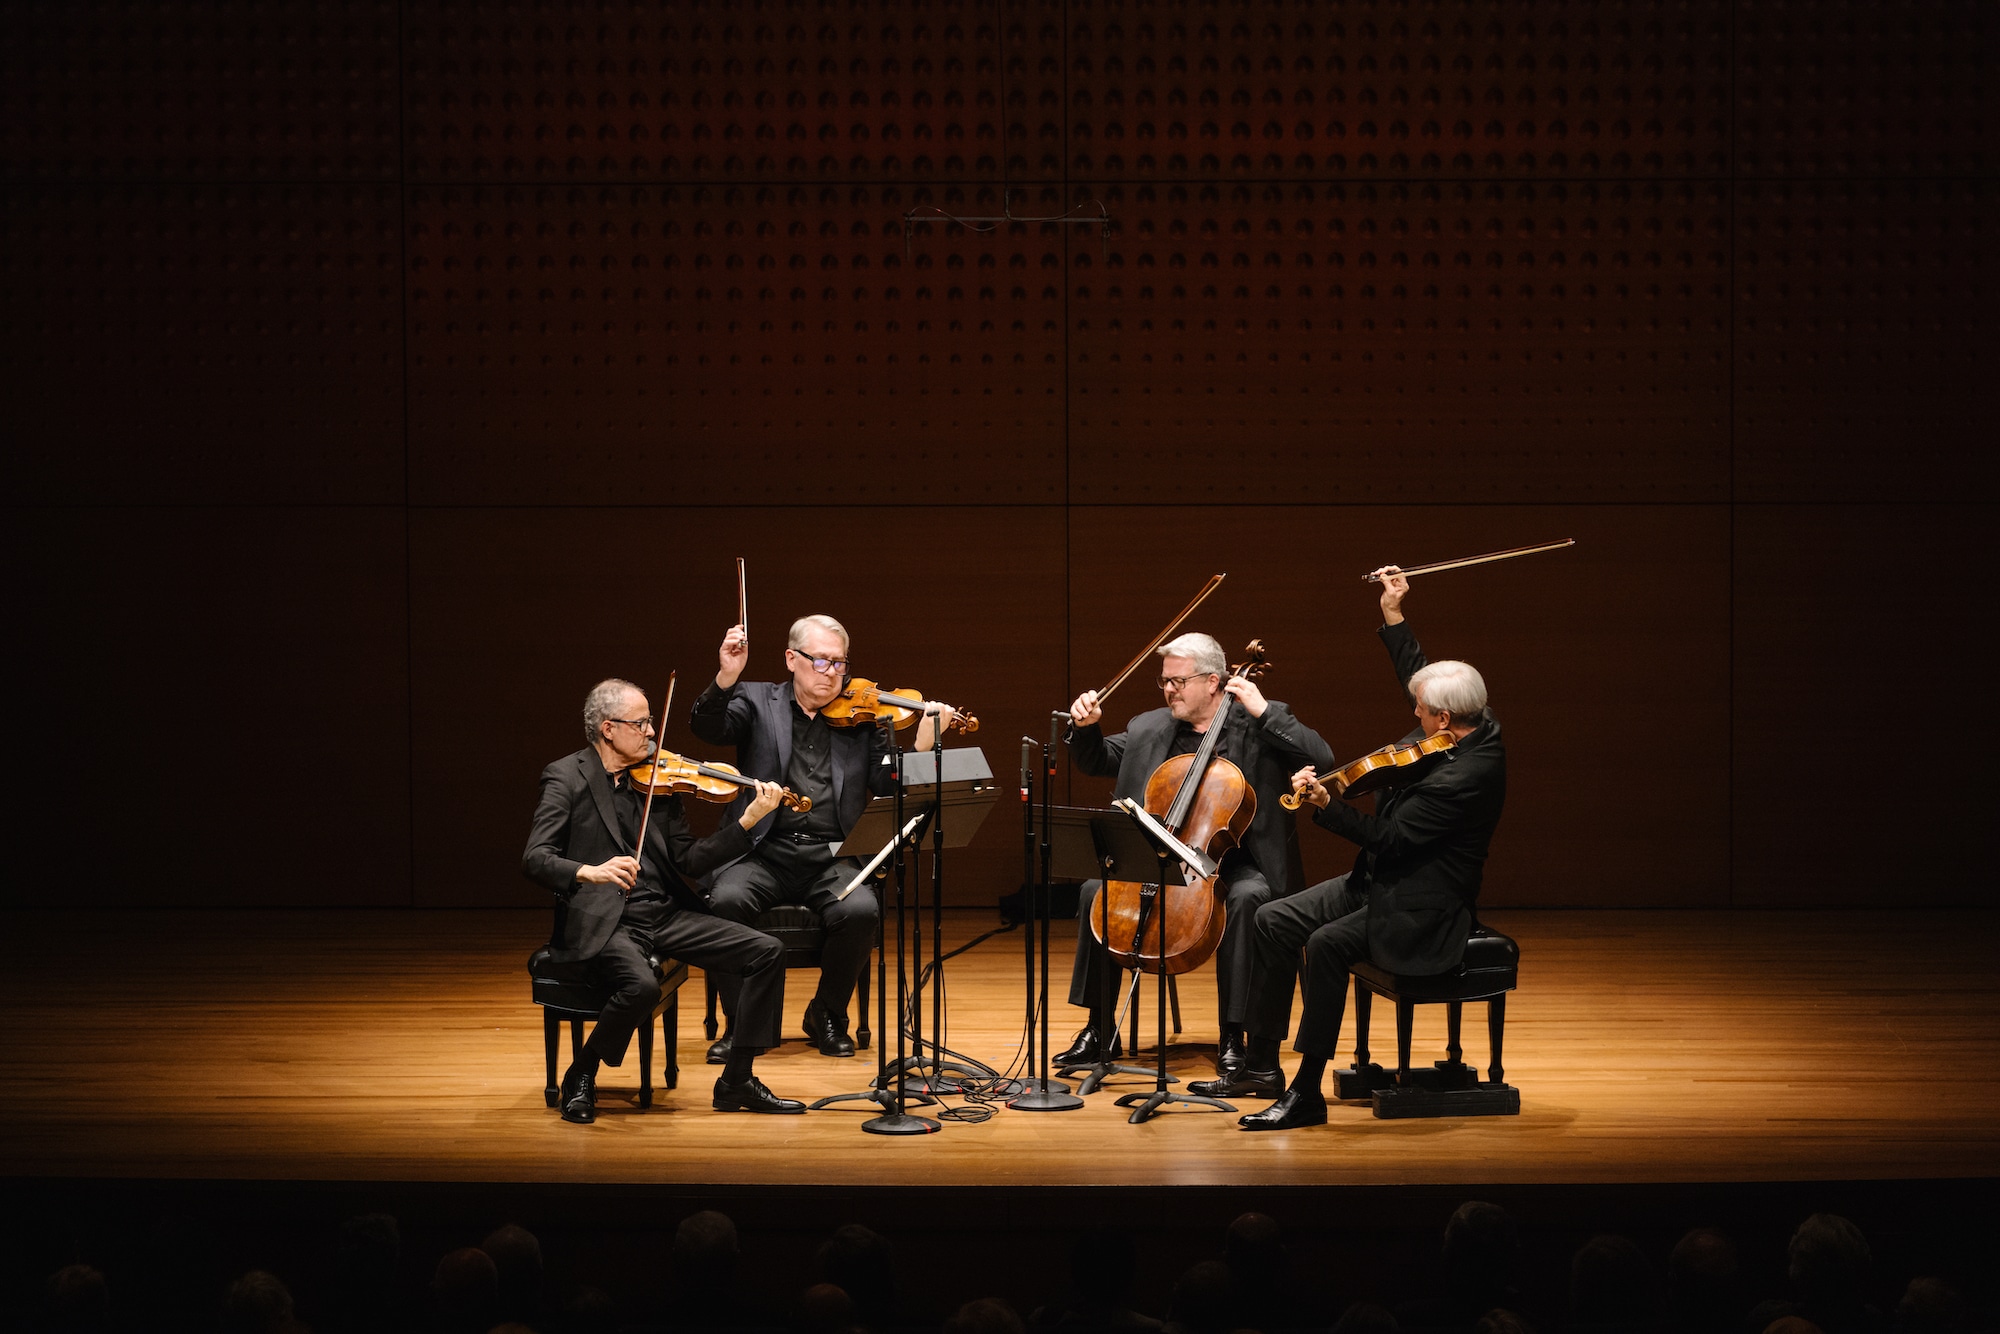 The very last notes of the Emerson Quartet